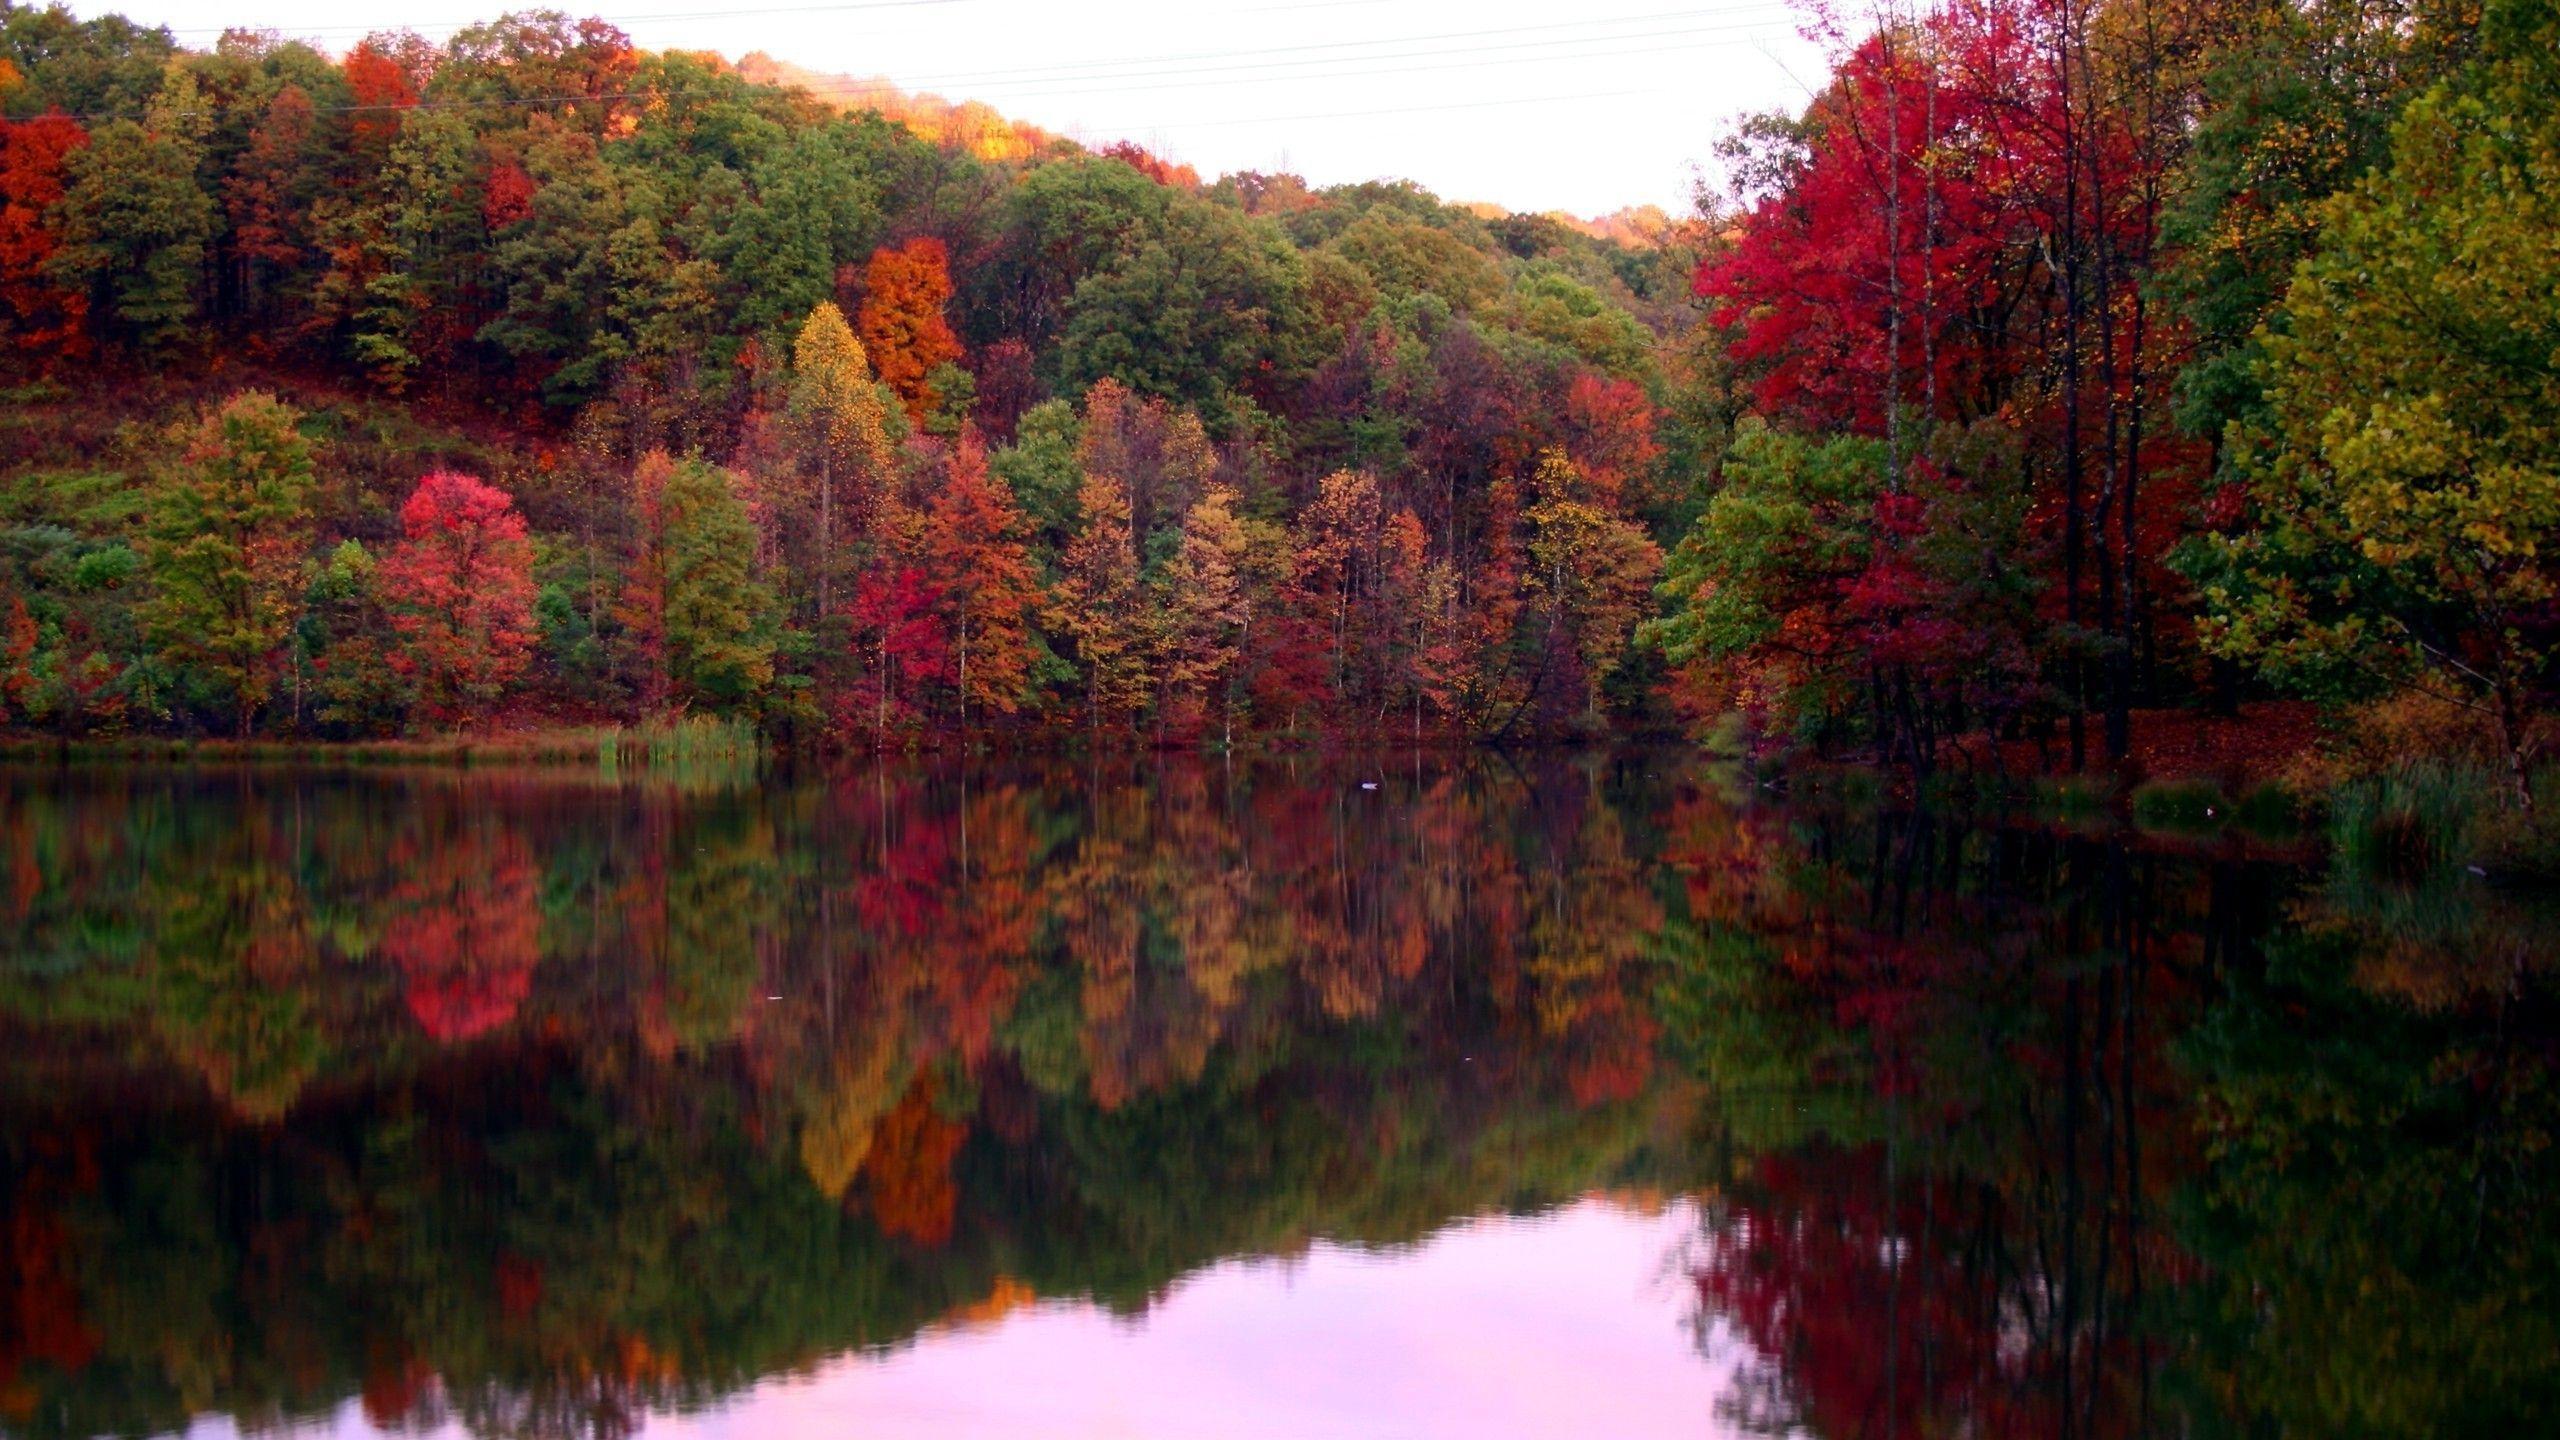 River reflecting the colorful fall trees Wallpaper #